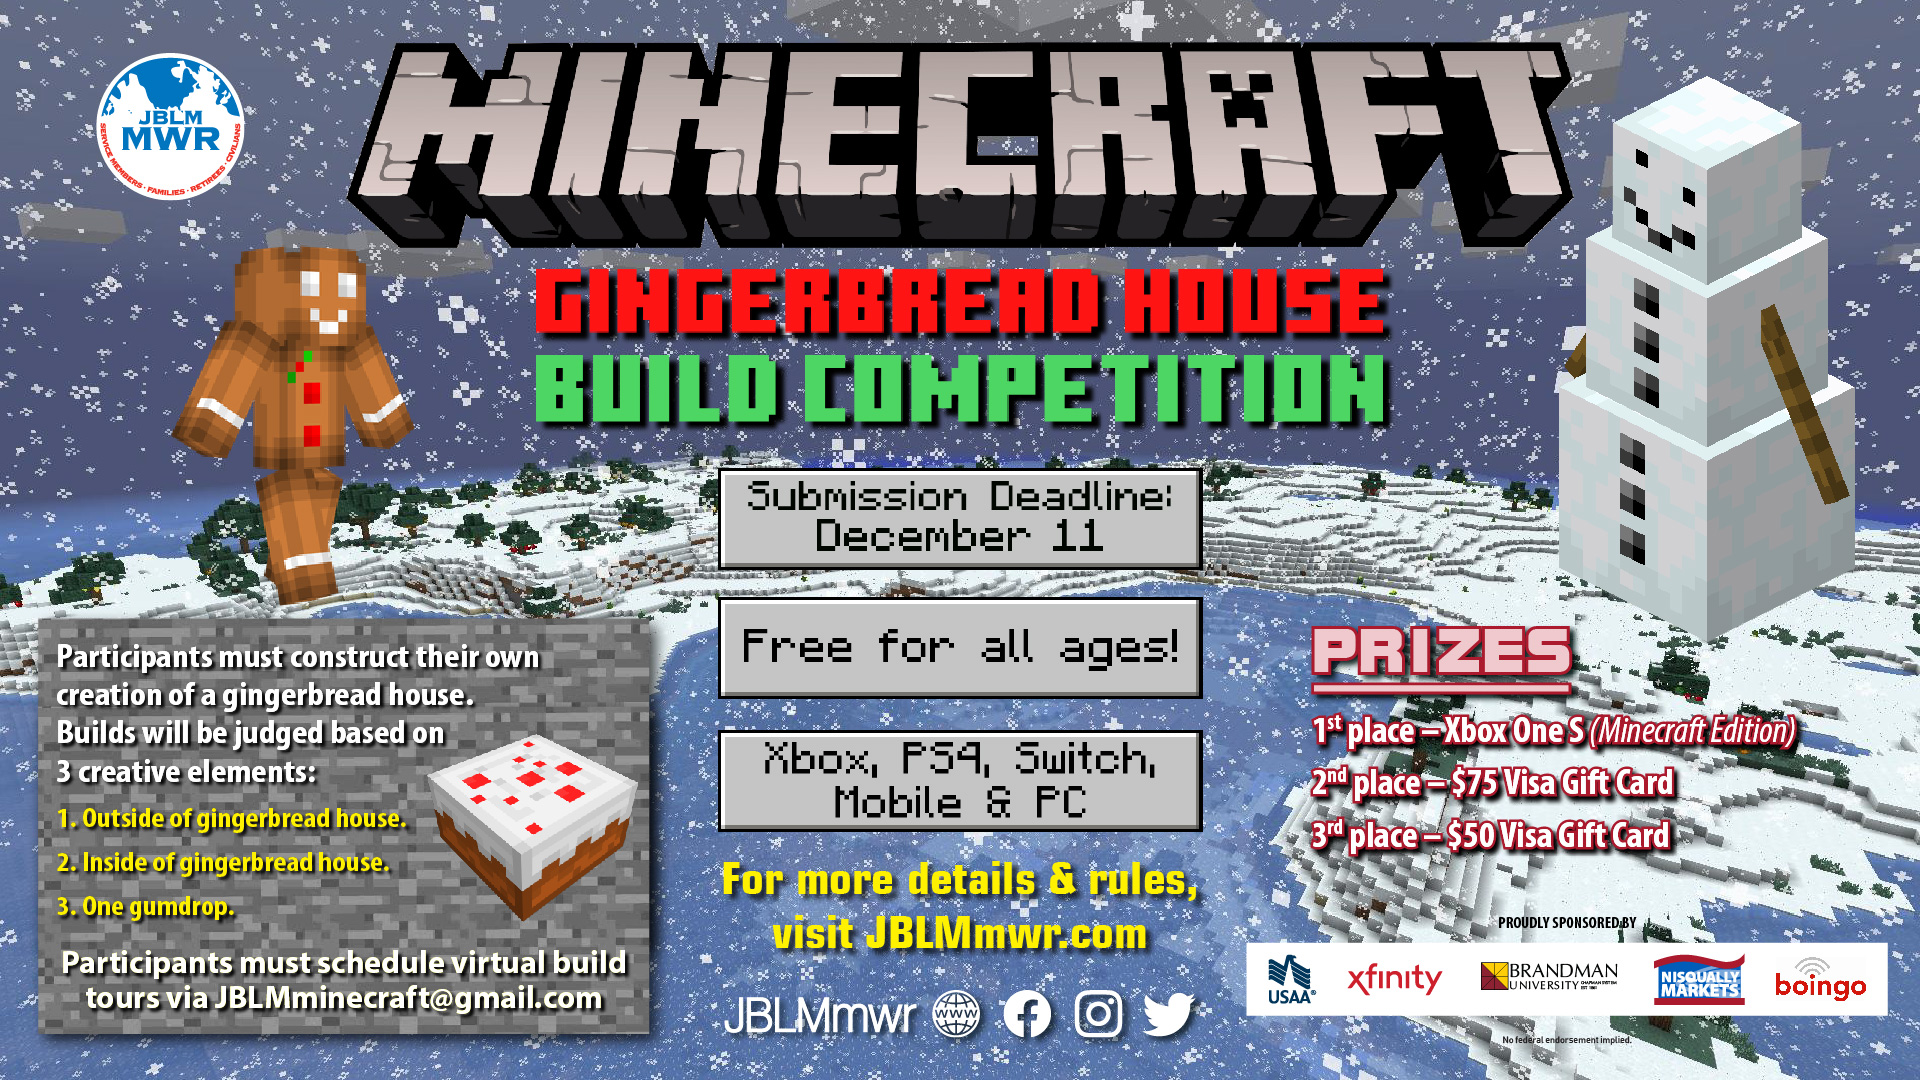 7677675-JBLM_148160 Minecraft Gingerbread House Build Competition.jpg